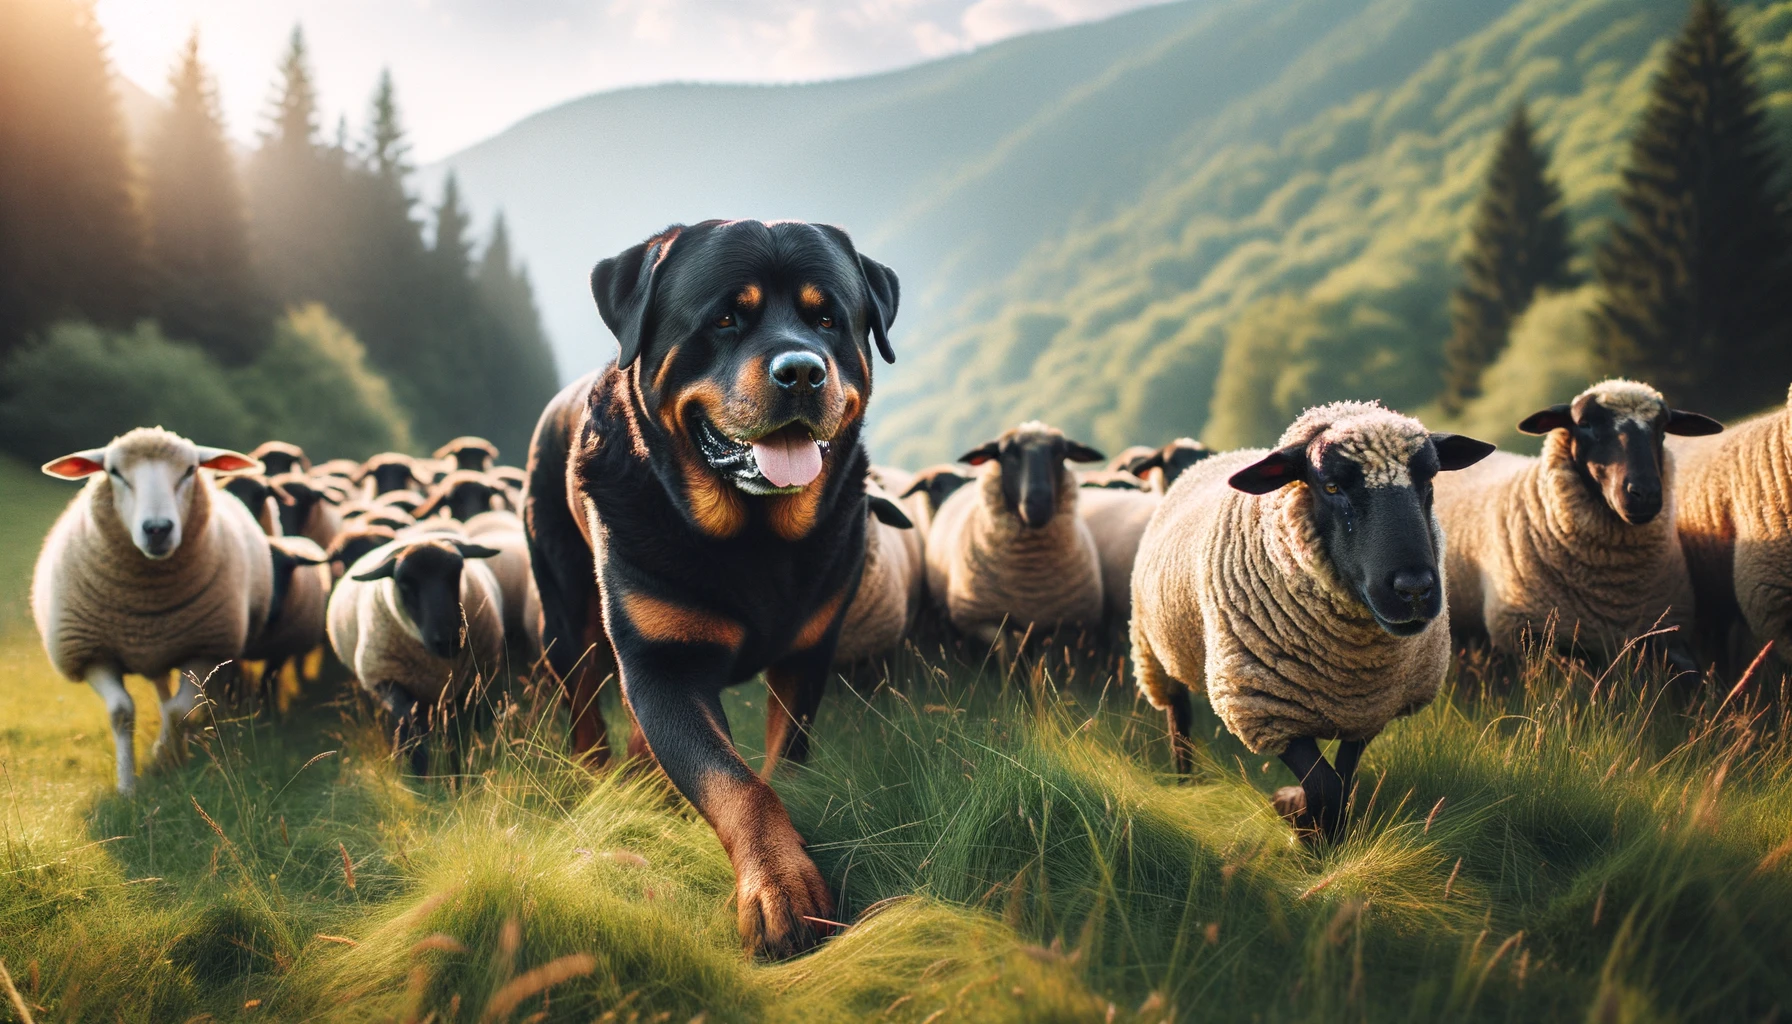 Rottweiler Lab Mix in a pastoral setting, herding livestock with focused intensity